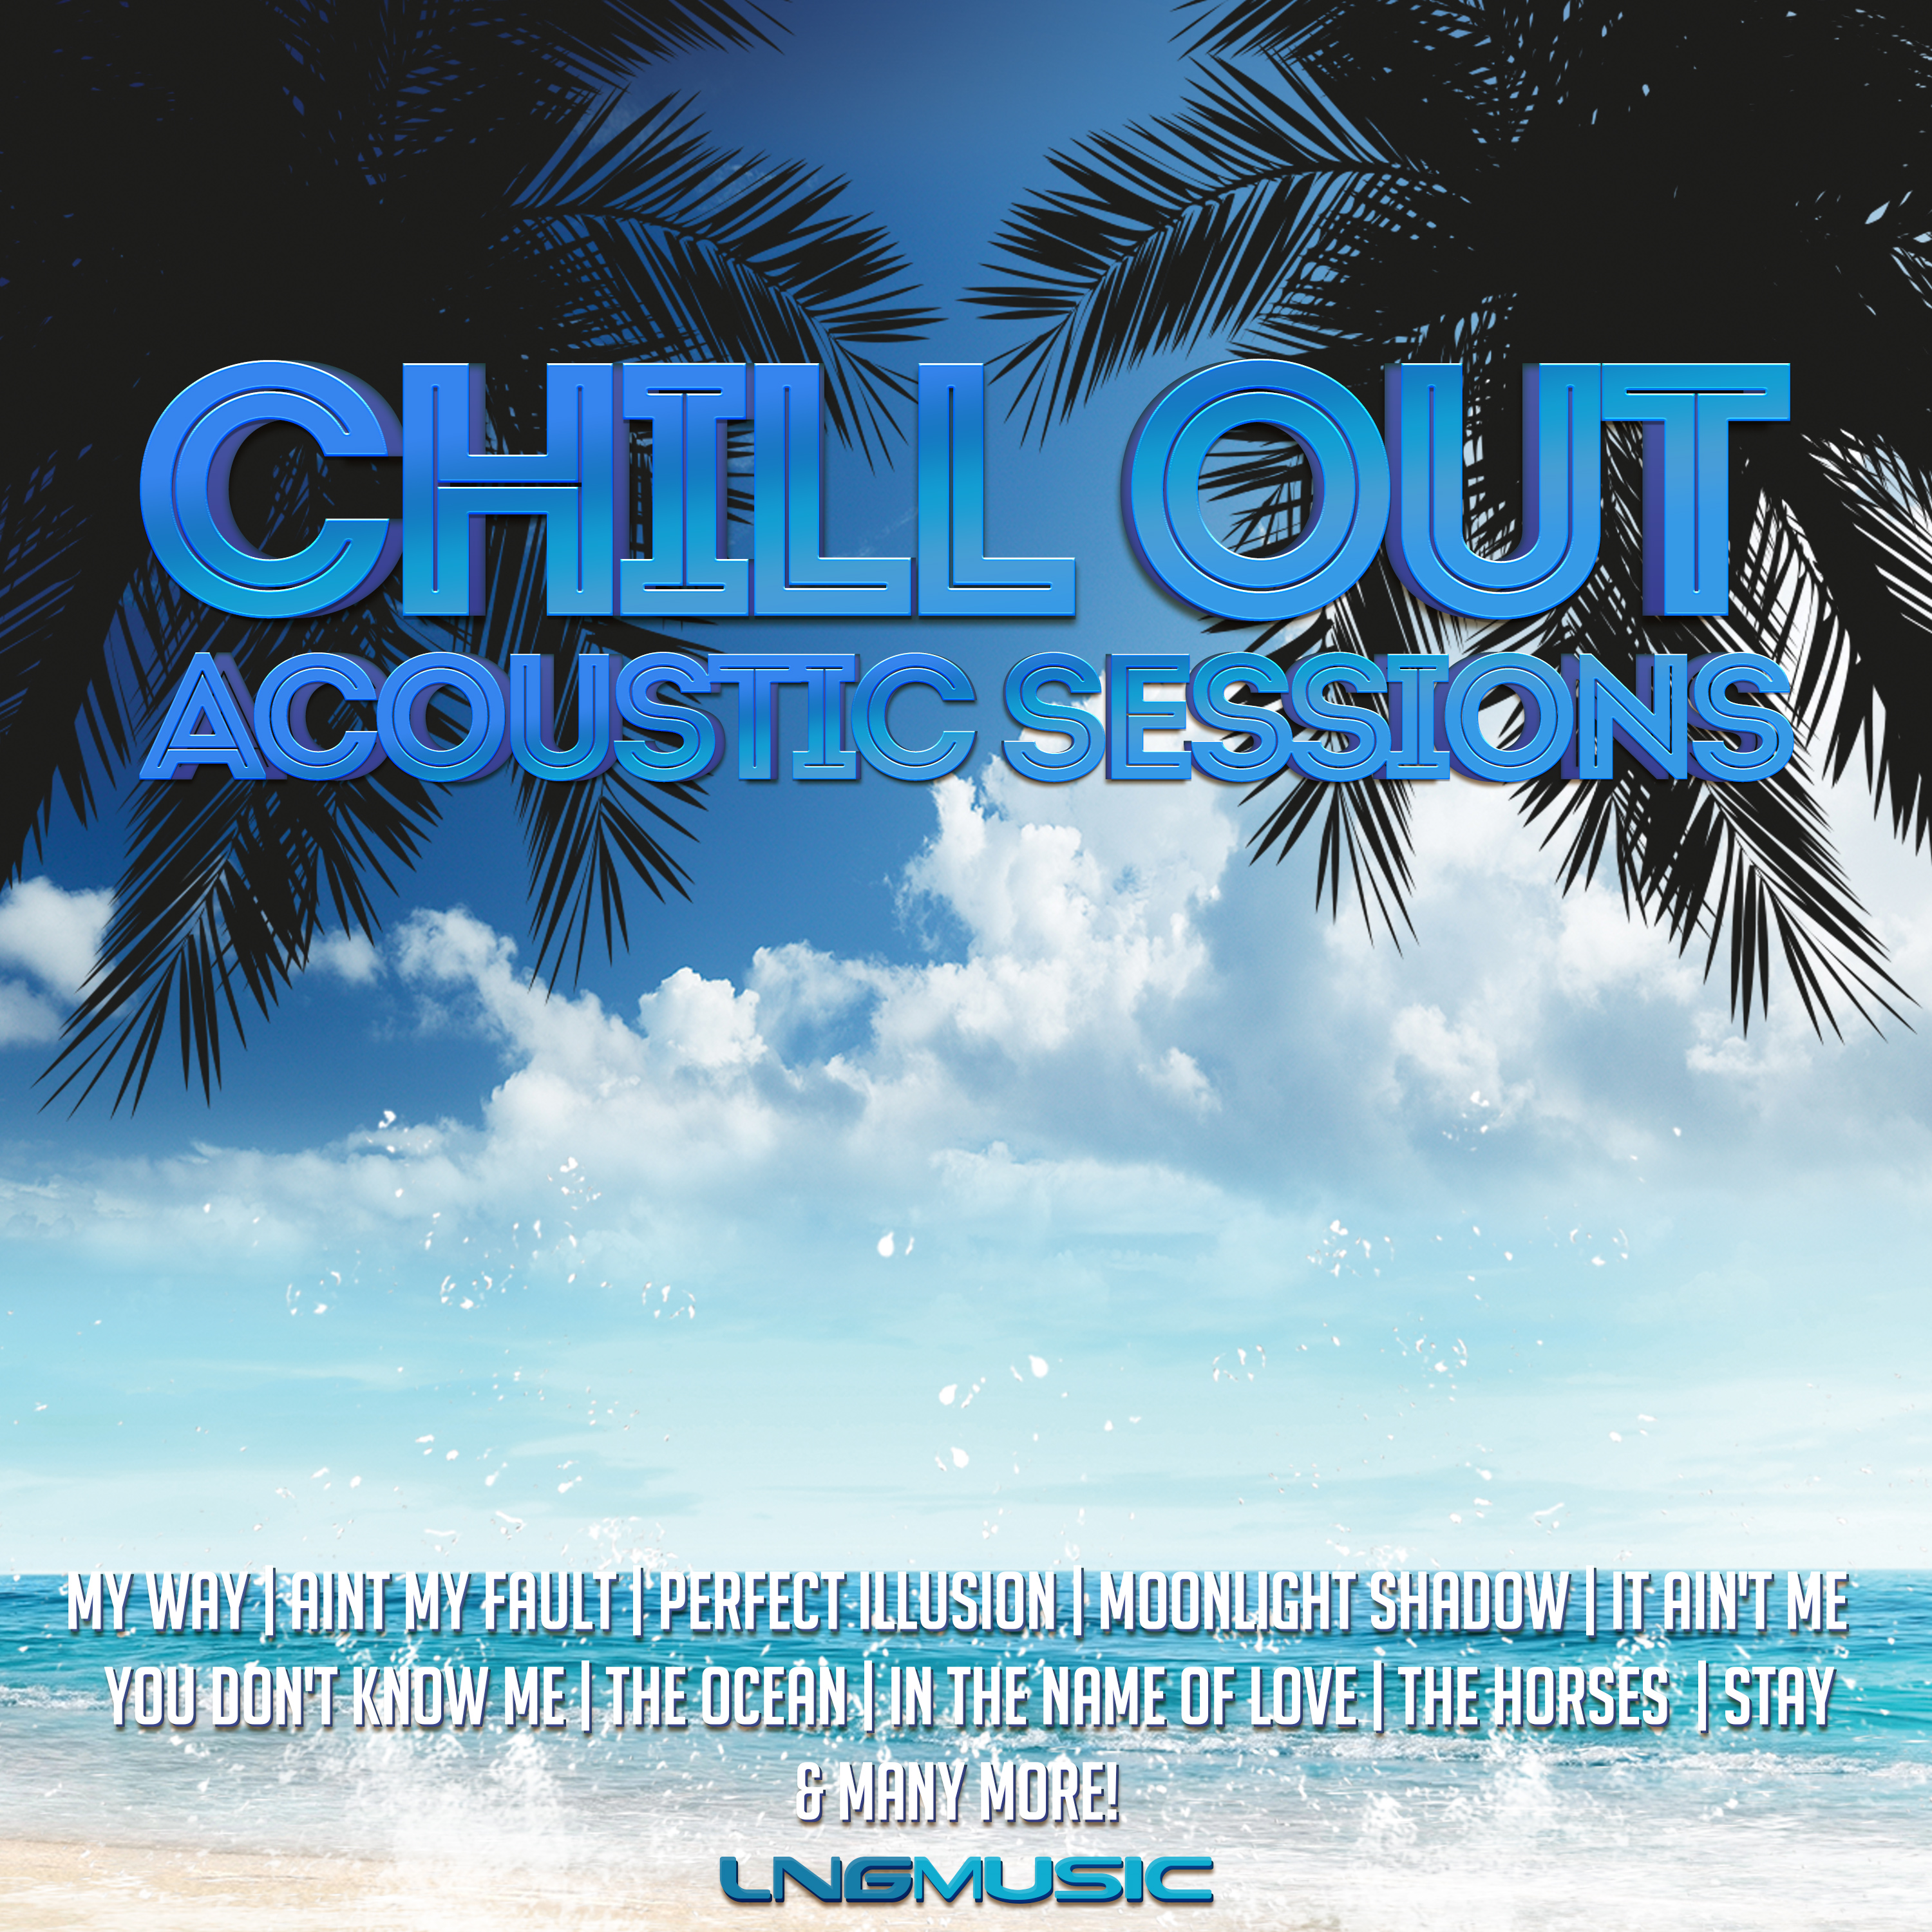 Moonlight Shadow (Acoustic Chillout Version)